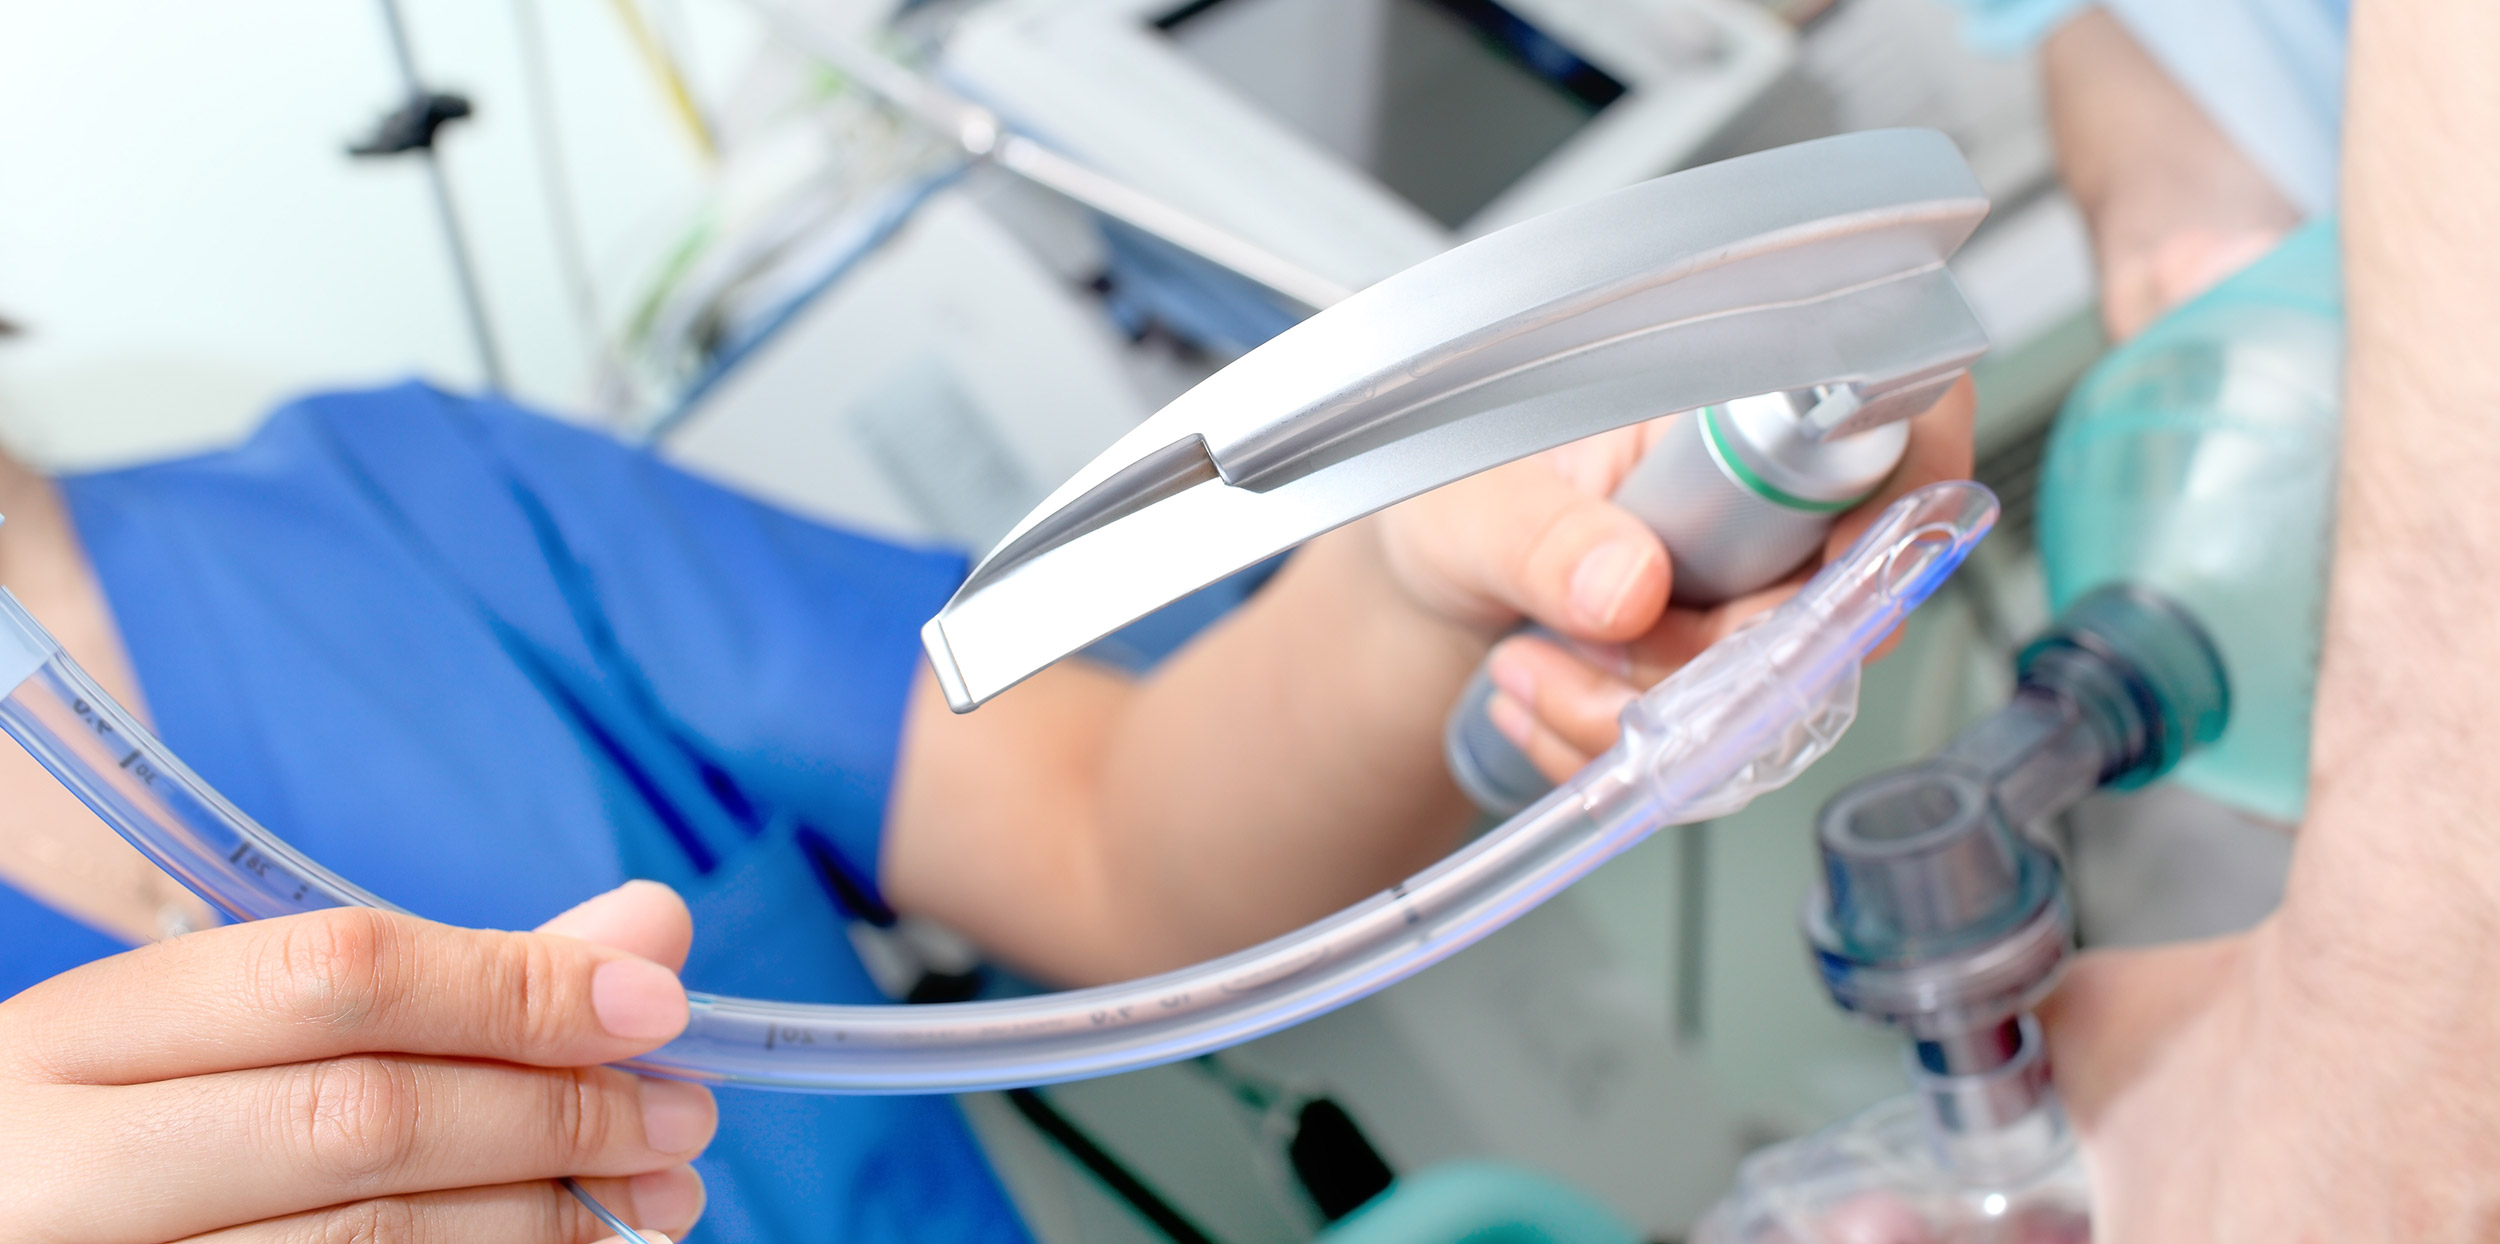 Assessing respiratory therapists performance when it comes to intubations.